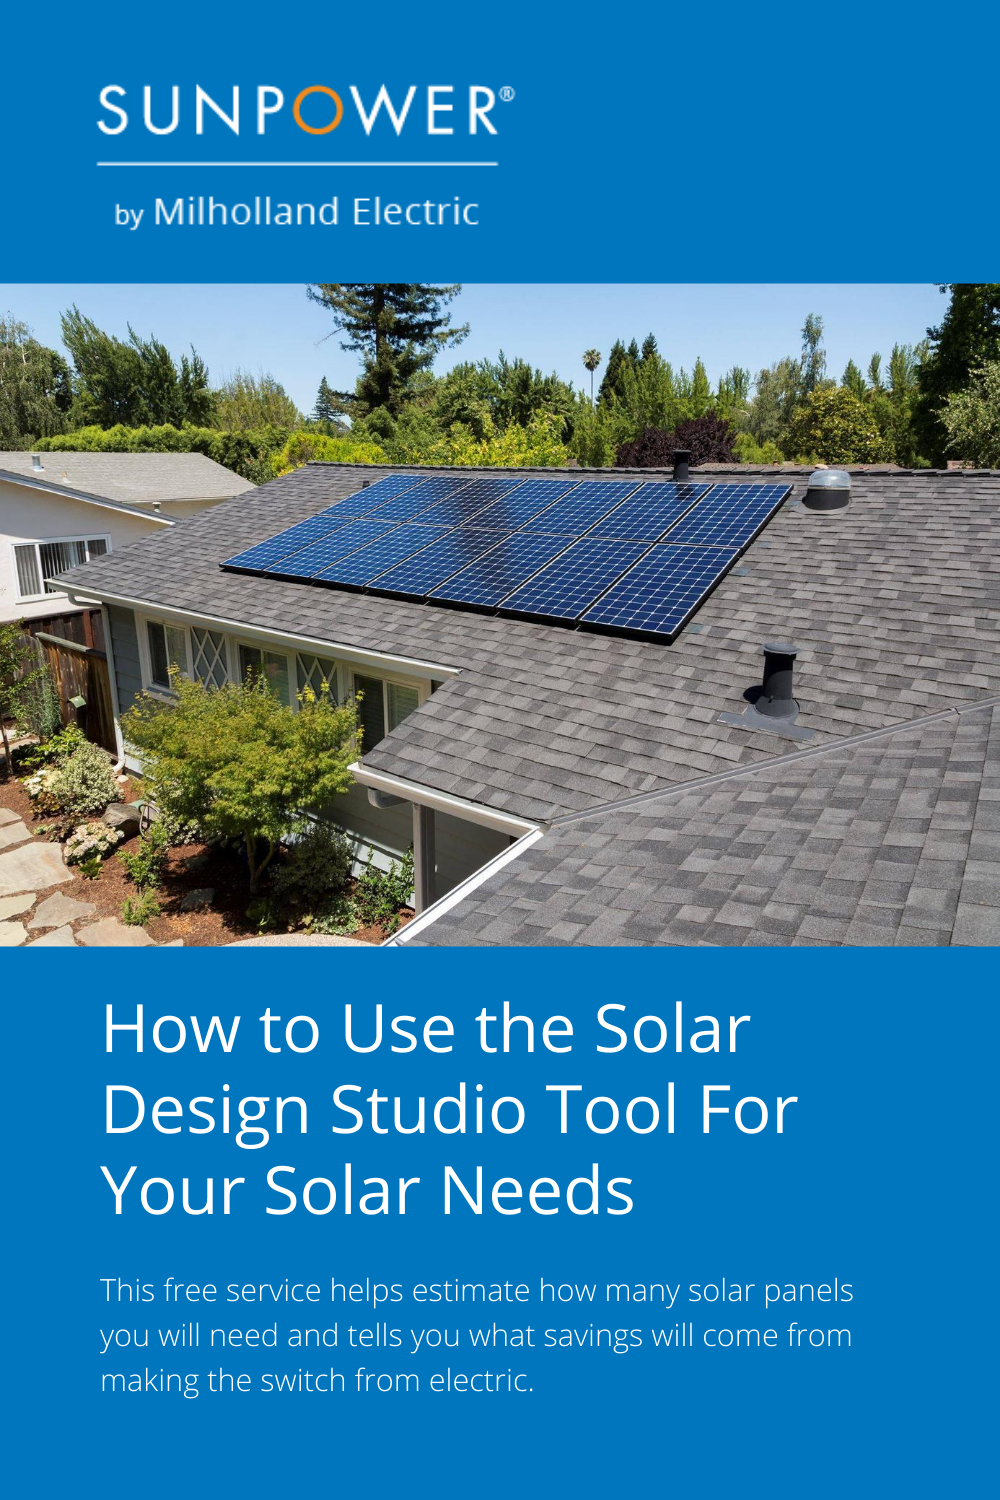 How Much Does A House Solar System Cost